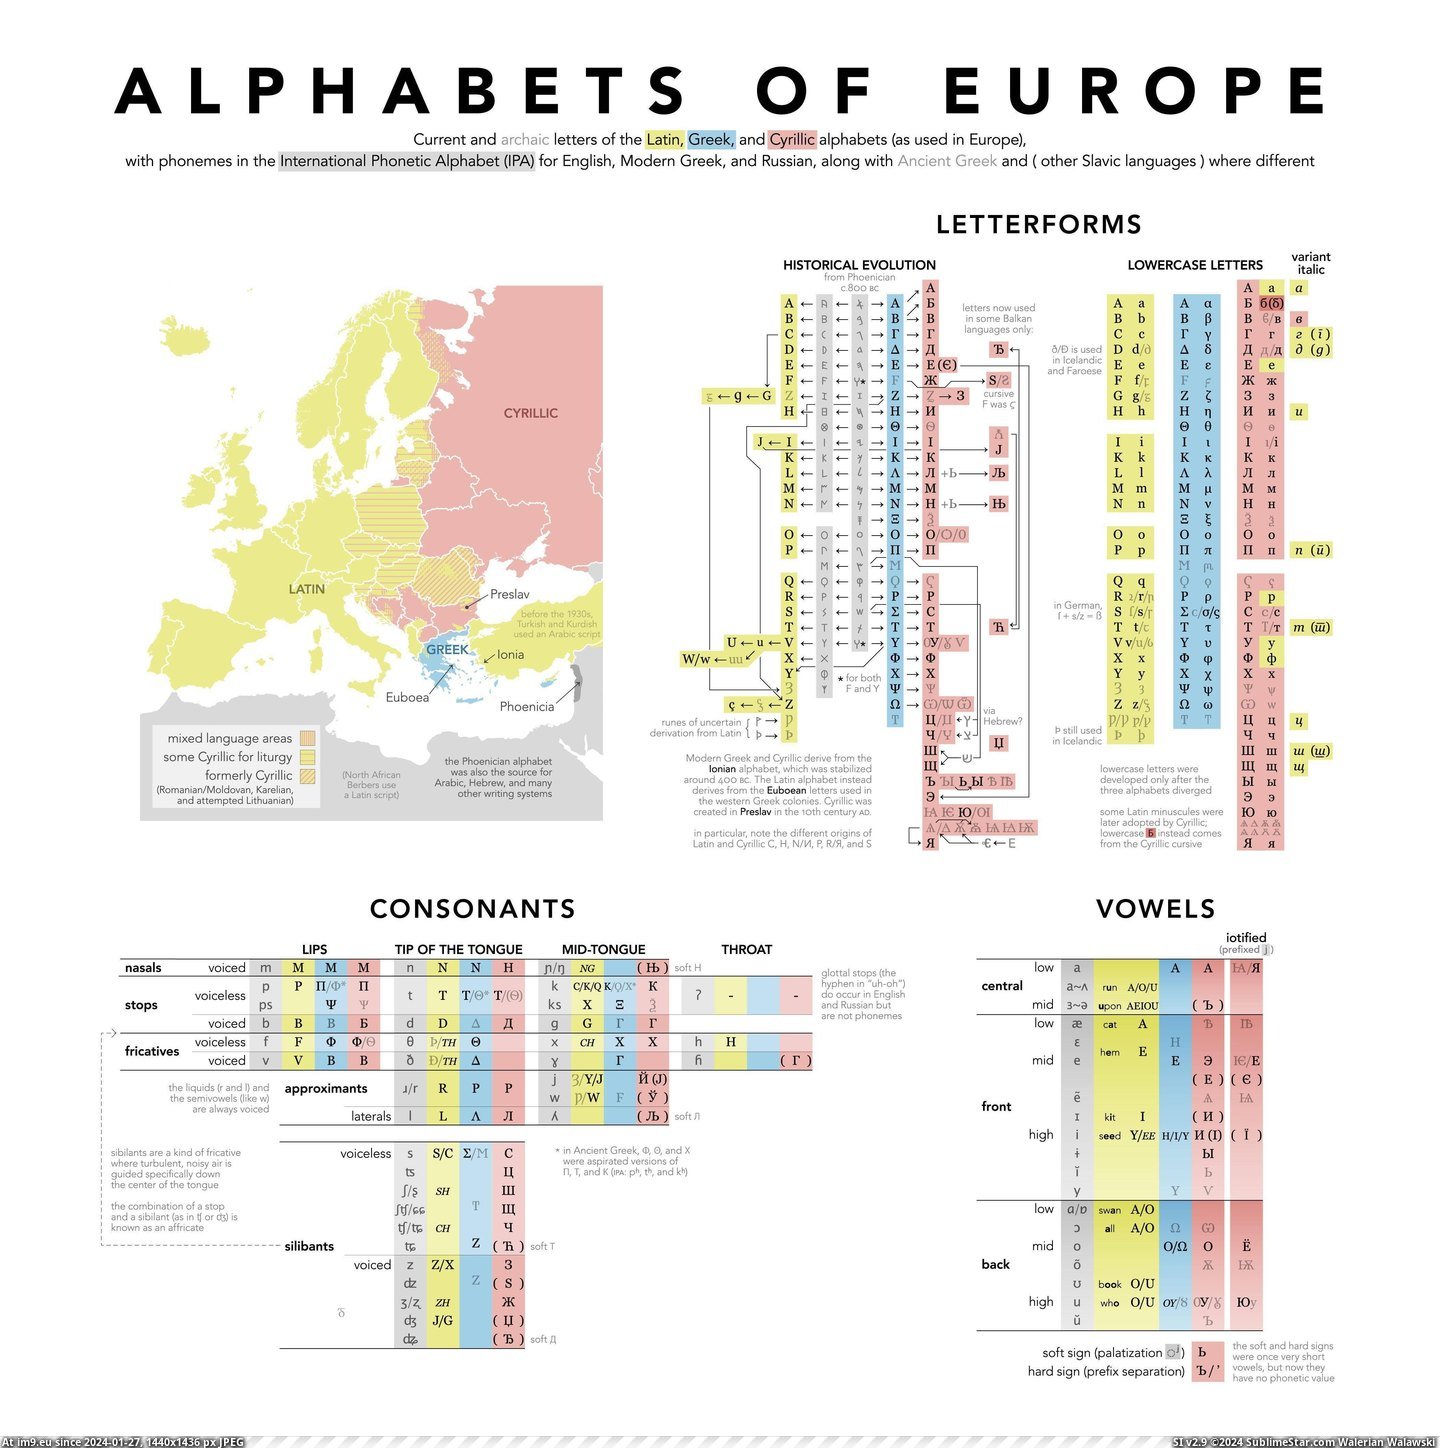 #Europe  #Alphabets [Mapporn] The 3 alphabets of Europe [4200x4200] Pic. (Image of album My r/MAPS favs))